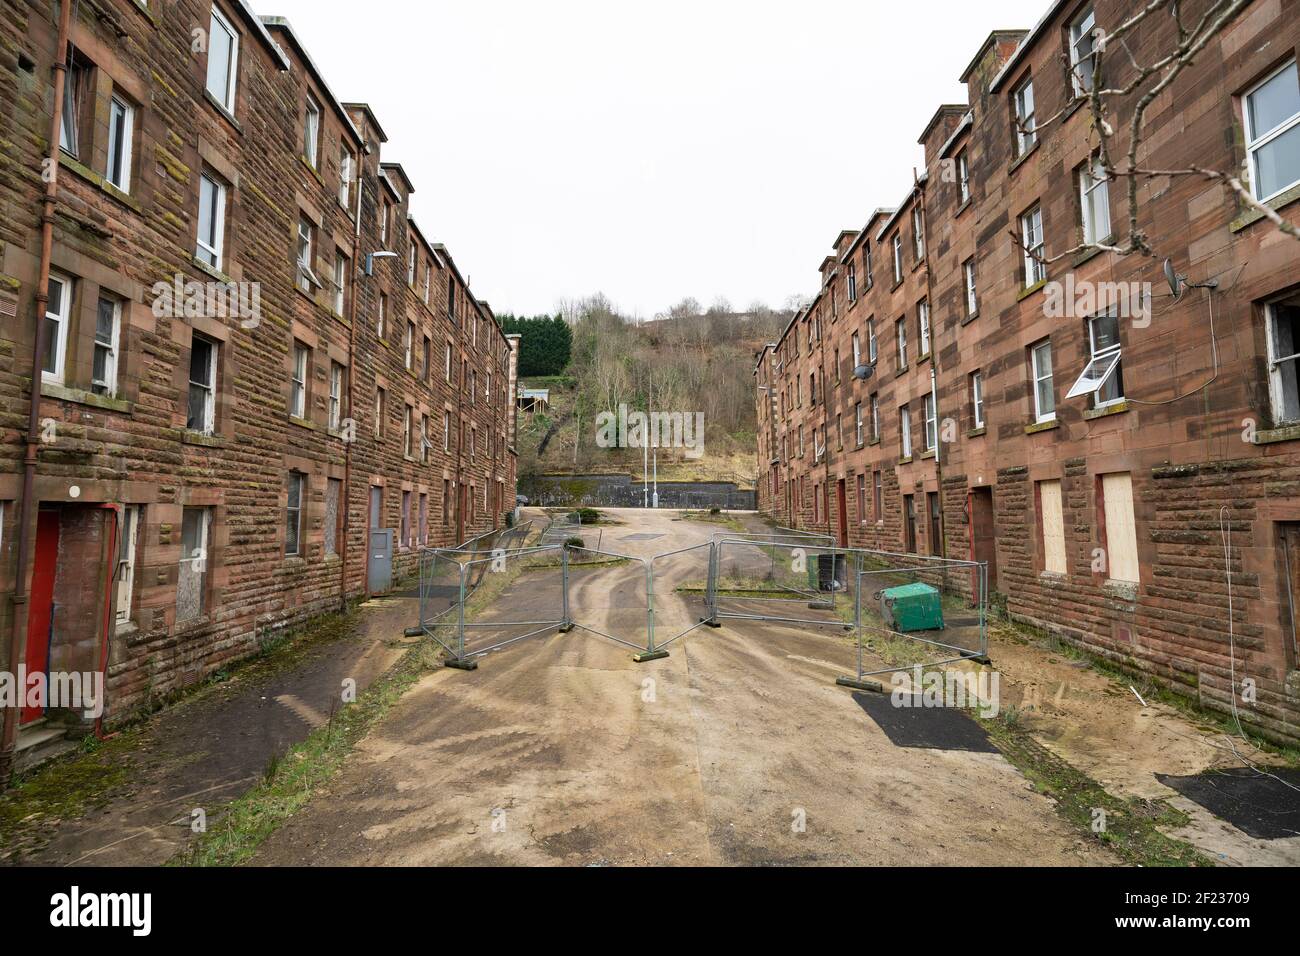 Views of derelict housing at Clune Park in Port Glasgow, Inverclyde. Tenement housing is due to be demolished and redeveloped. Scotland, UK Stock Photo